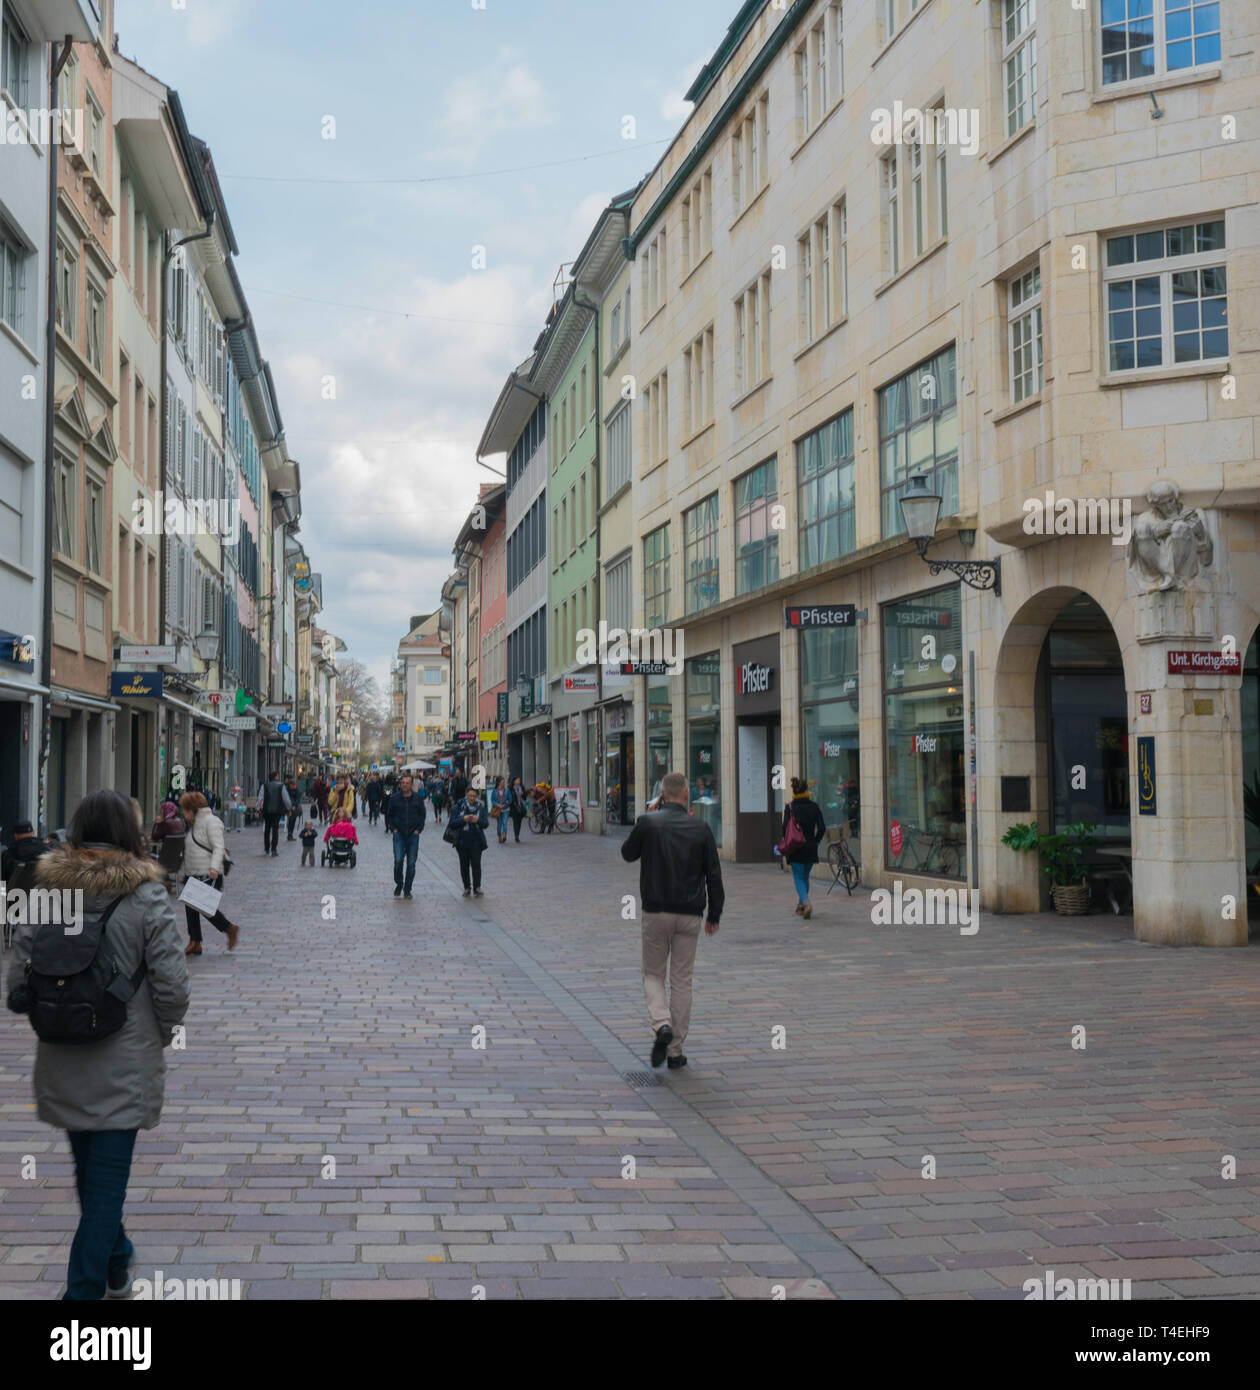 Winterthur, ZH / Switzerland - April 8, 2019: the hustle and bustle of the historic Marktgasse street in old town Winterthur with people running erran Stock Photo